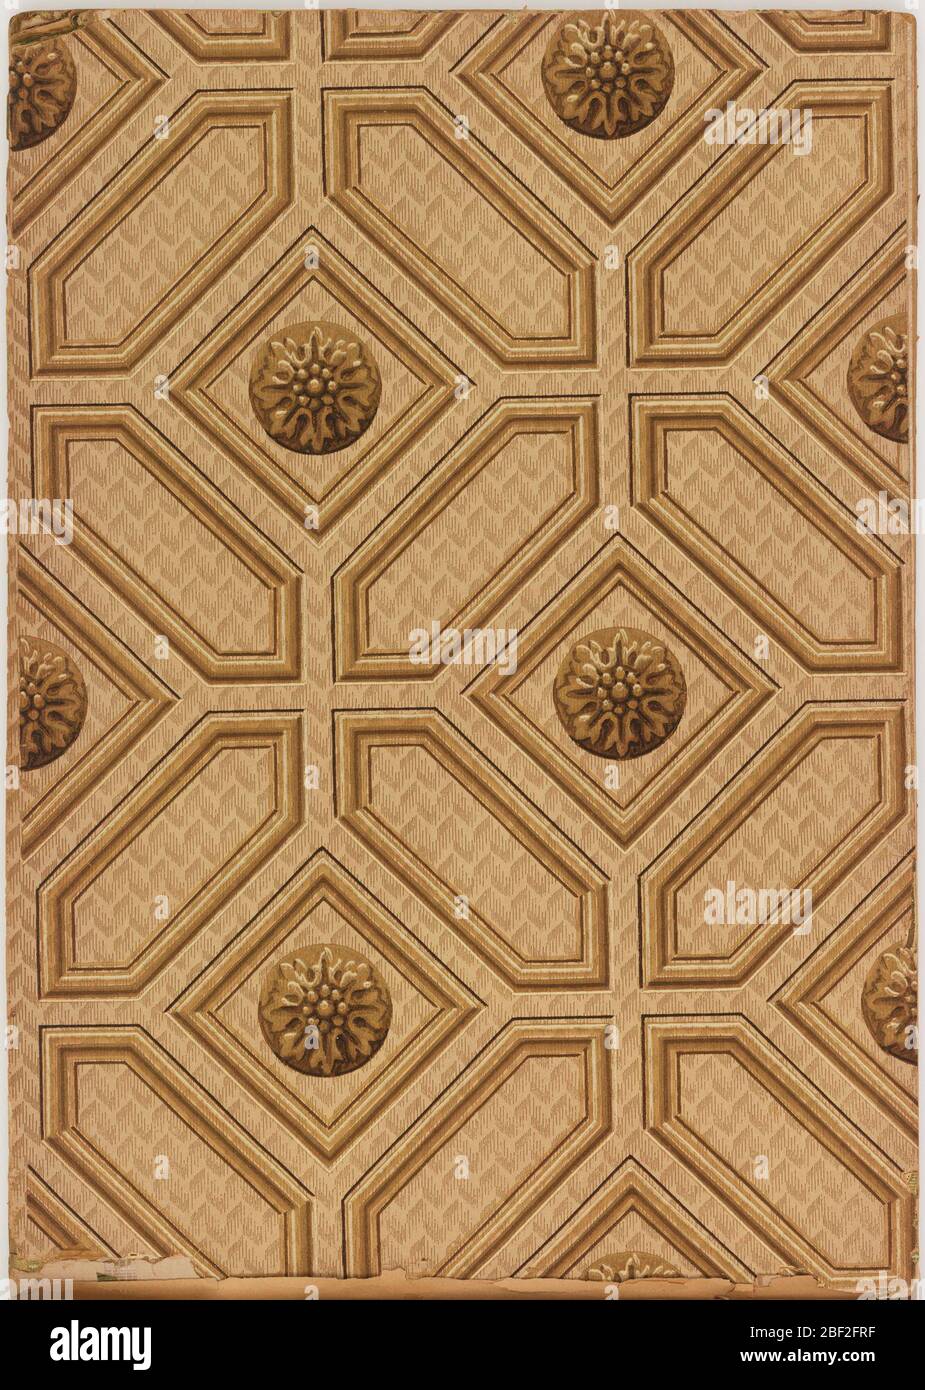 The Wallace Wallpaper Co. Samples includes a range of papers including  ceiling papers, imitation leather papers, cut-out borders, and a coffered  panel design Stock Photo - Alamy